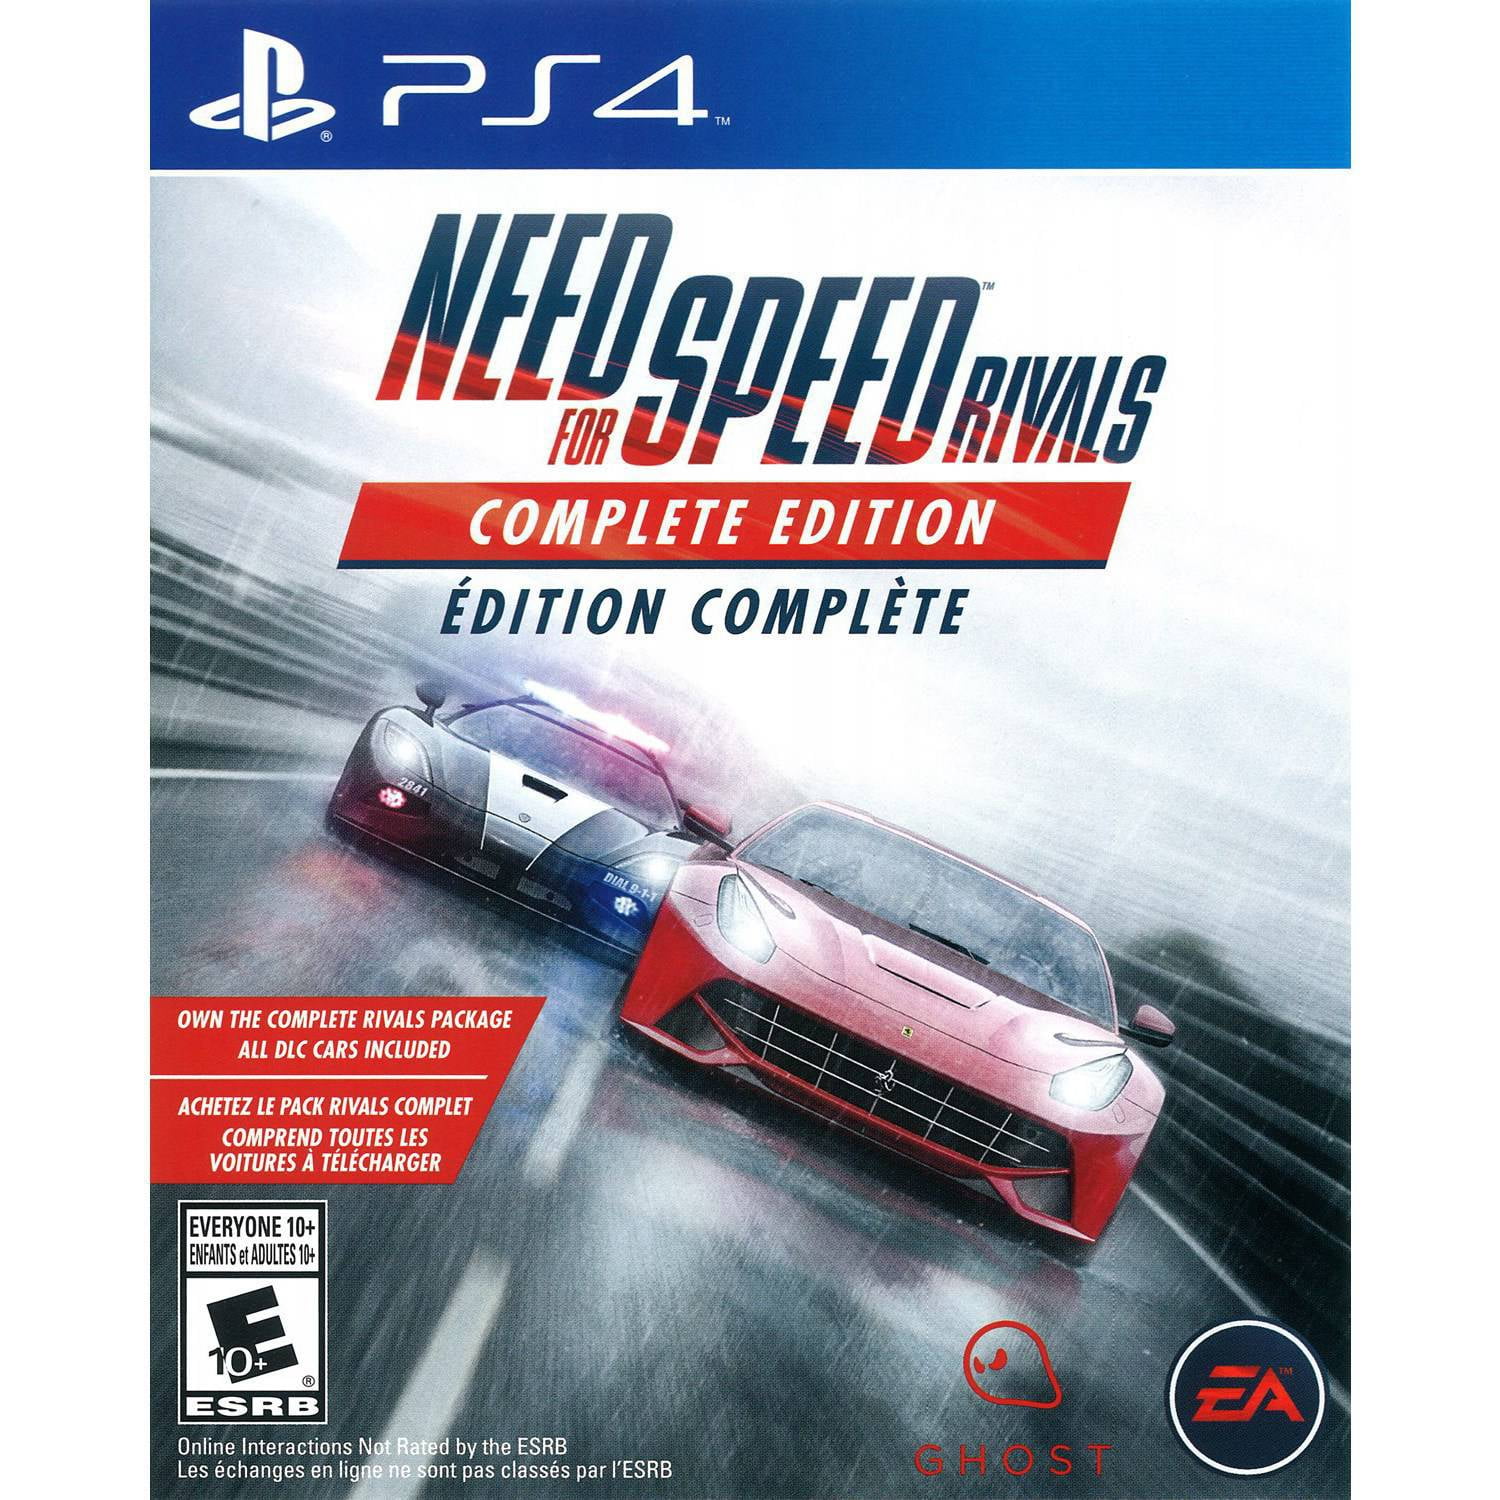 Need for Speed Payback Deluxe Edition, Electronic Arts 